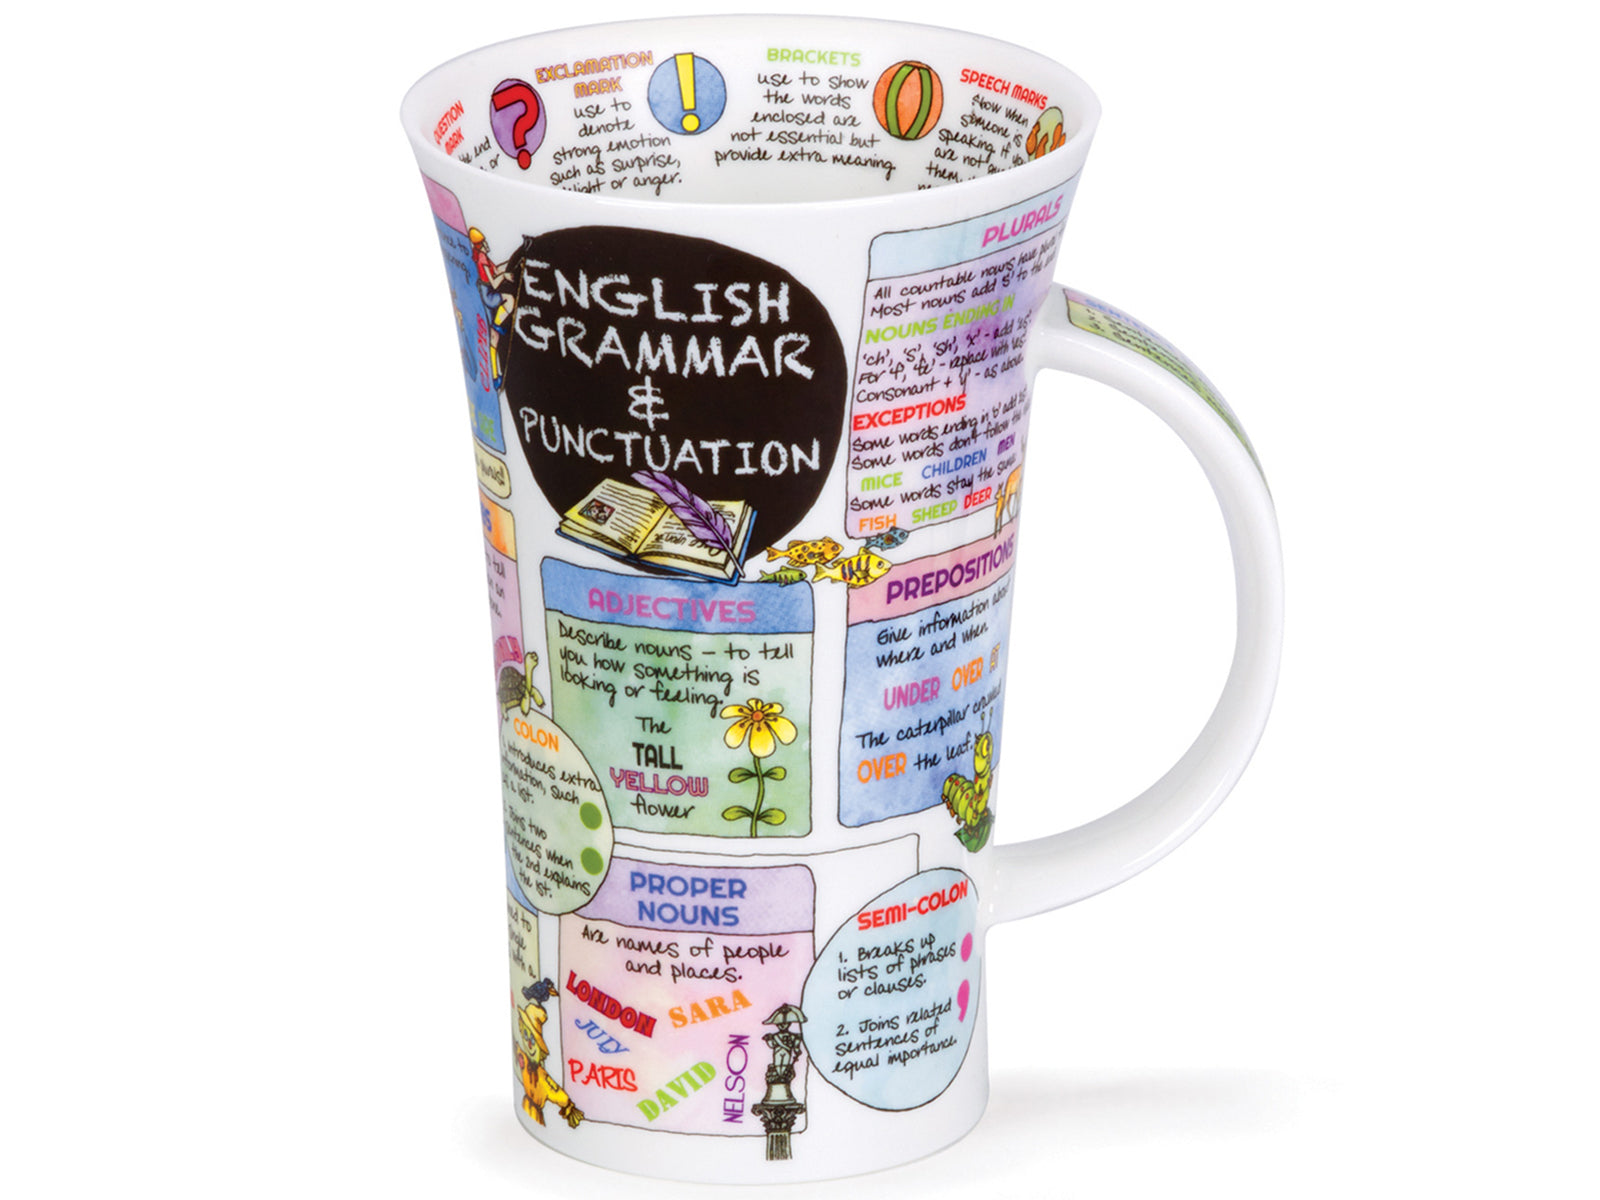 Dunoon Glencoe English Grammar & Punctuation Mug is a large fine bone china mug that is printed with various colourful definitions of each category different words fall into and how to apply these properly. Around its inner rim is different types of punctuation, along with a classic grammatical lesson on the 'i' before 'e' rule.